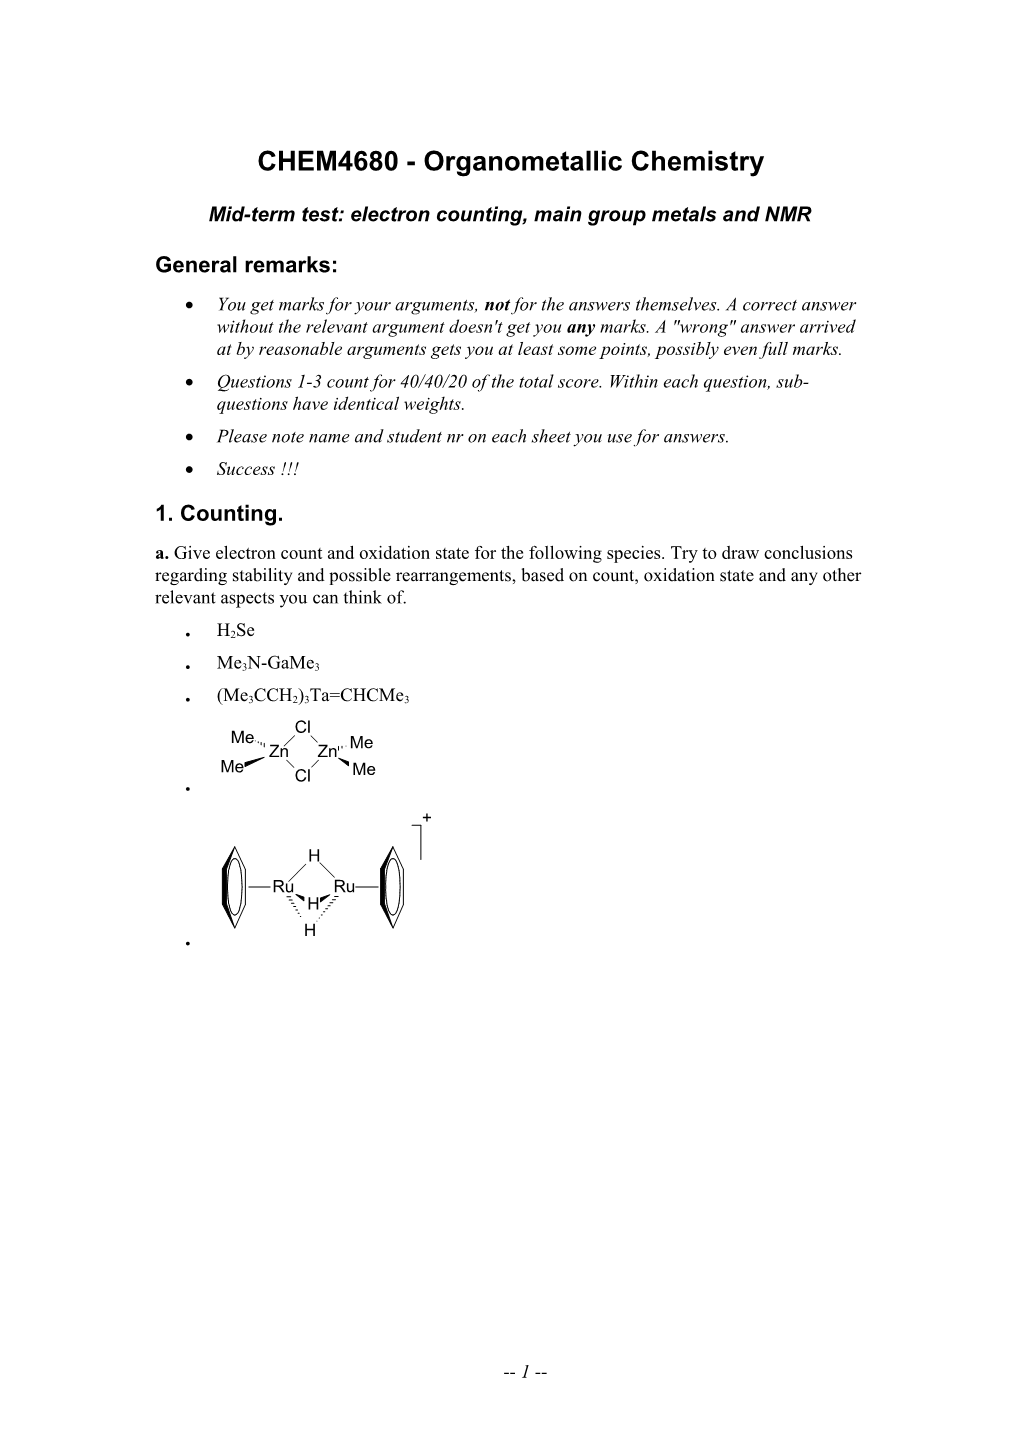 Mid-Term Test: Electron Counting, Main Group Metals and NMR